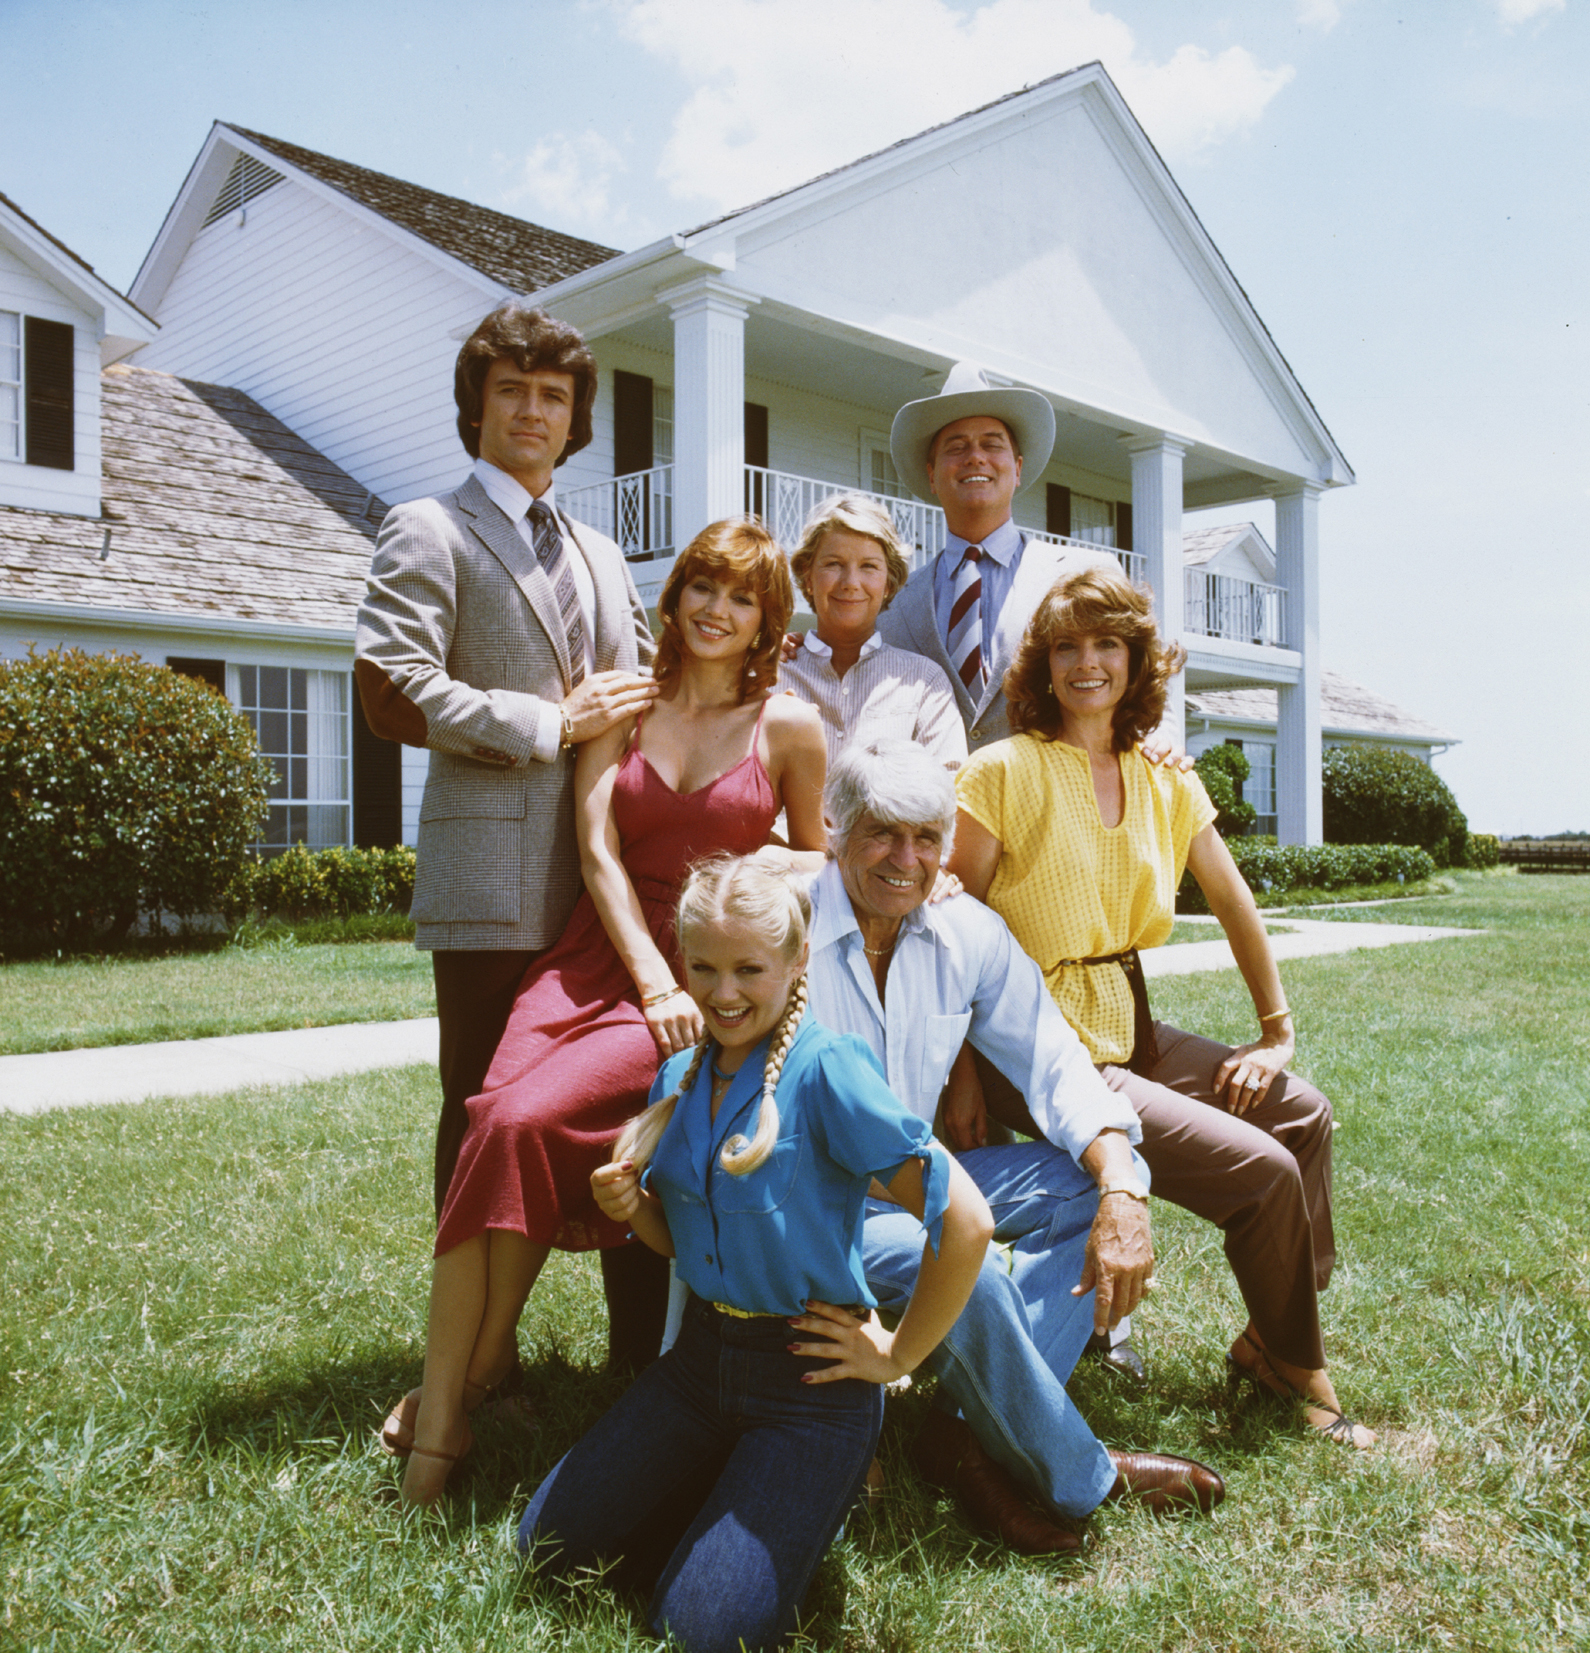 Patrick Duffy, Victoria Principal, Barbara Bel Geddes, Larry Hagman, Charlene Tilton, Jim Davis, and Linda Gray in a promotional still from "Dallas" in Dallas, Texas, 1979 | Source: Getty Images